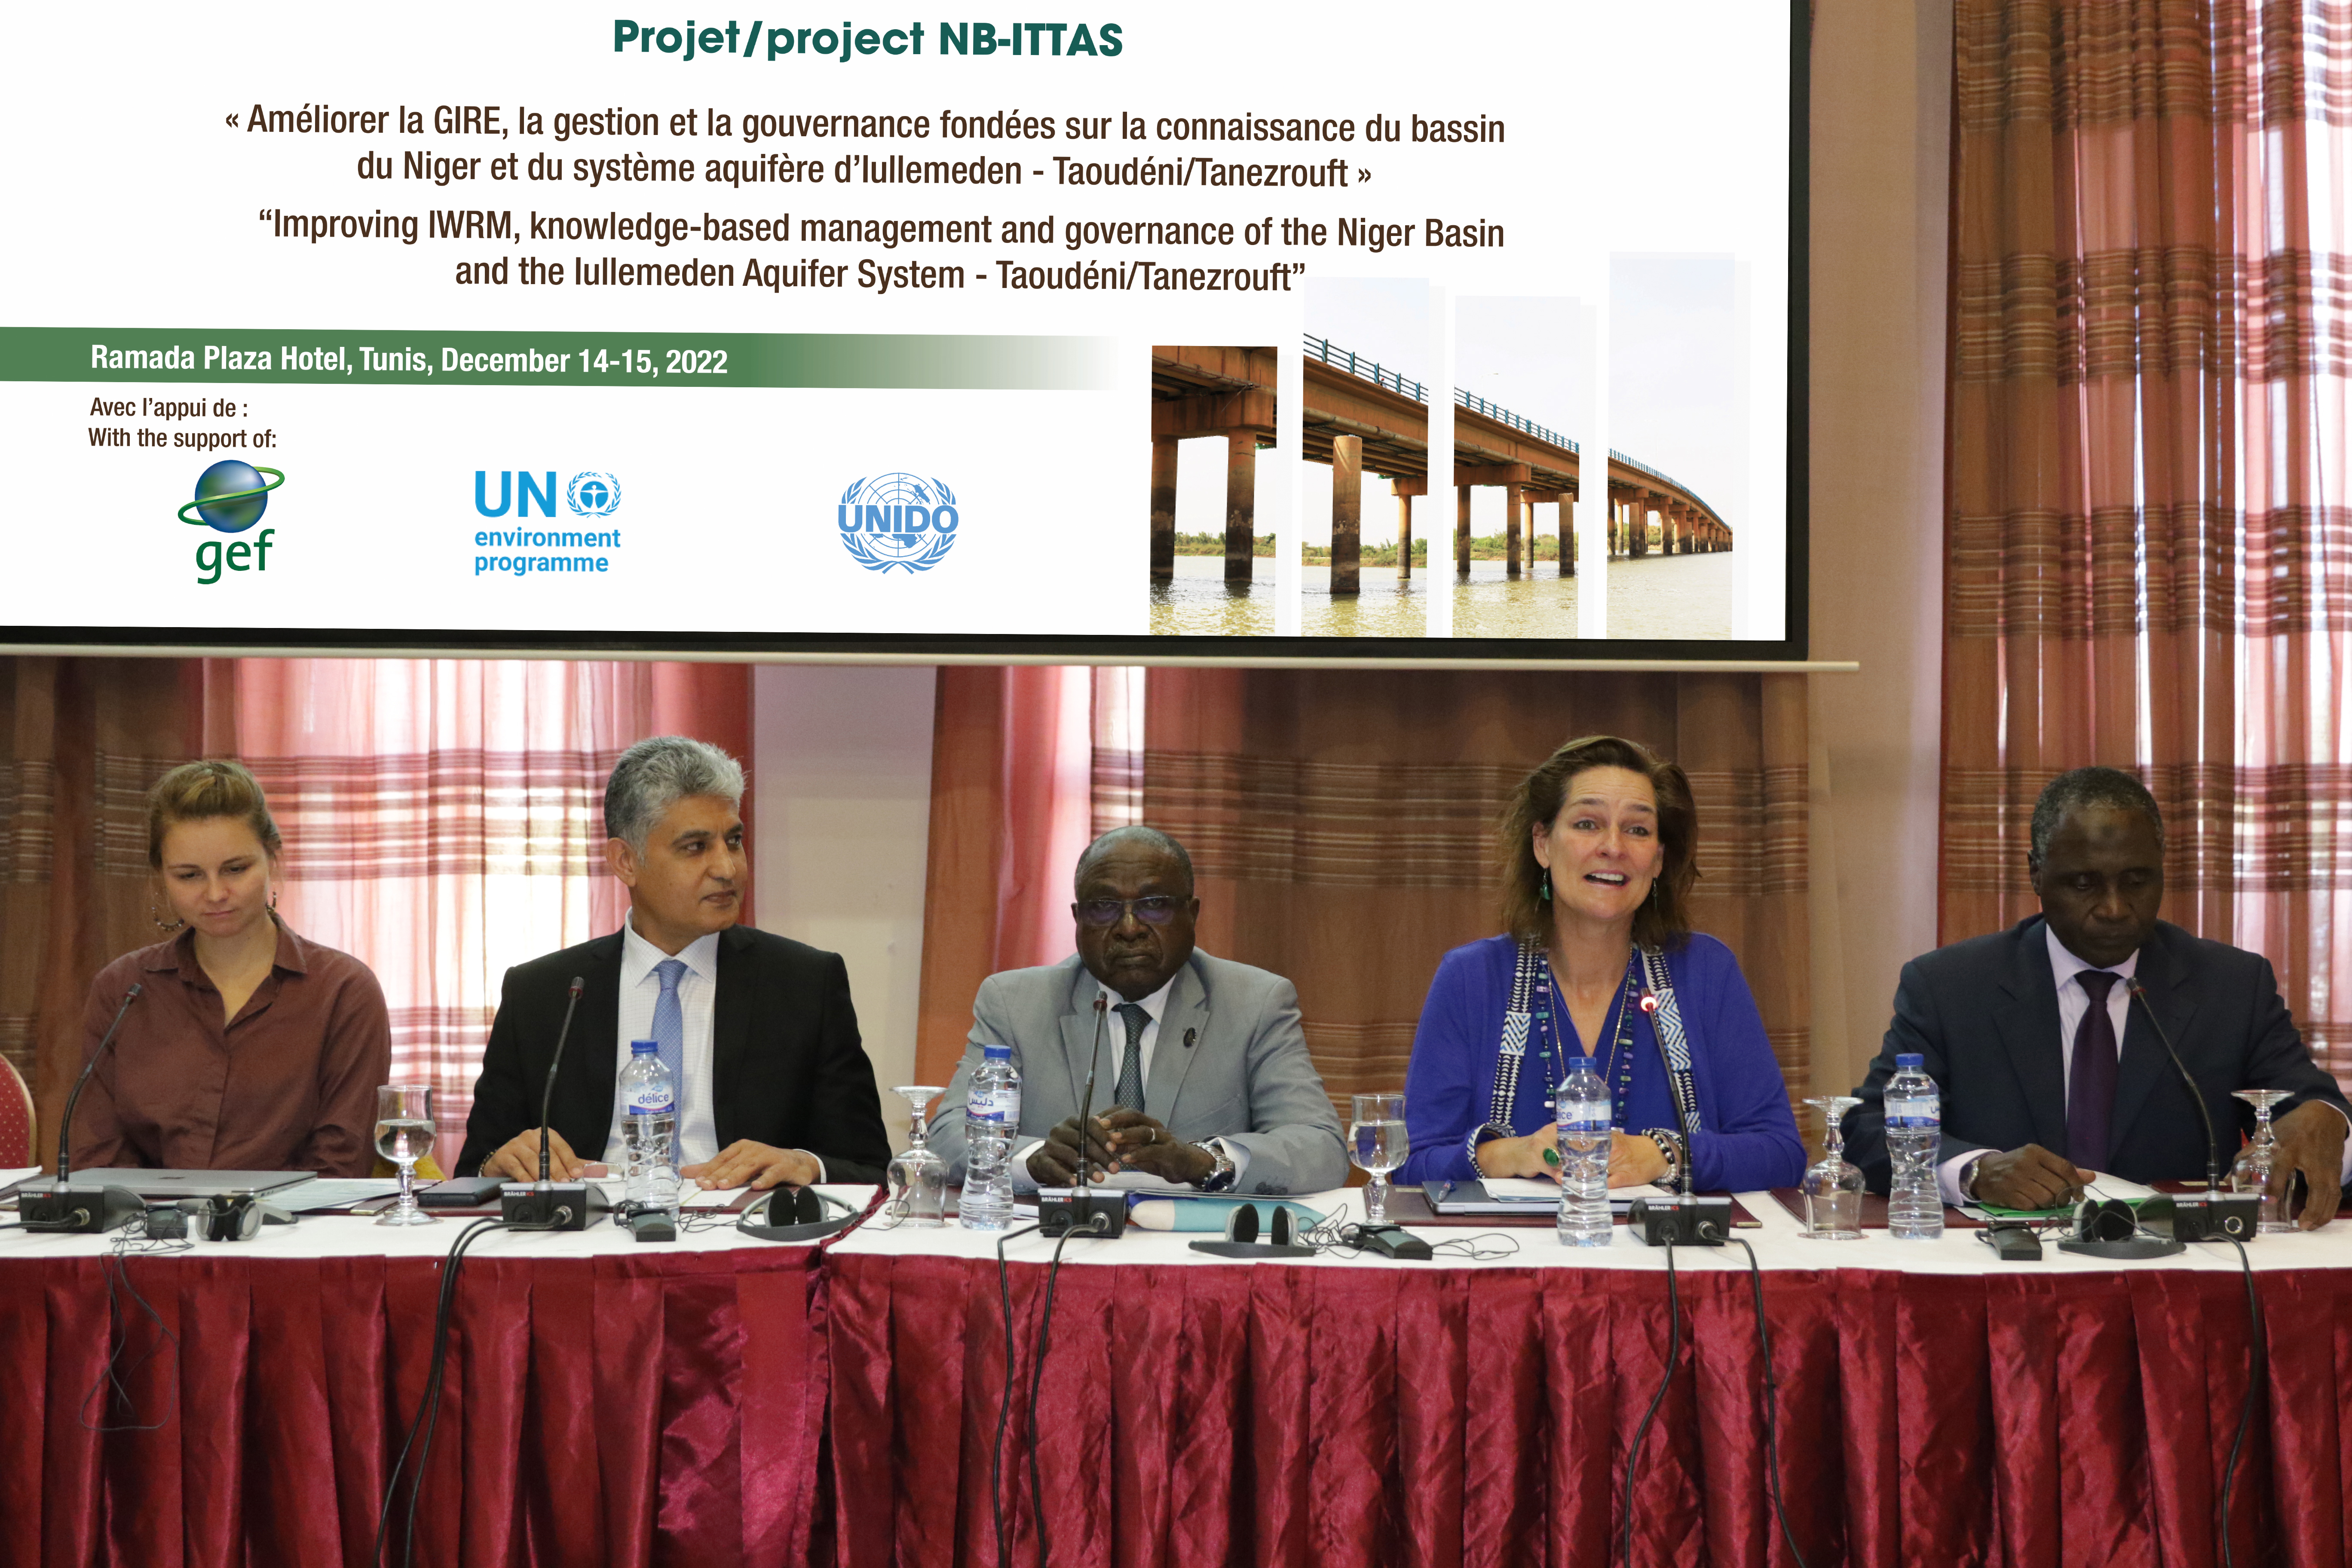  Shared water resources: Opening of the NB-ITTAS regional project Steering Committee, Tunis, December 14, 2022 